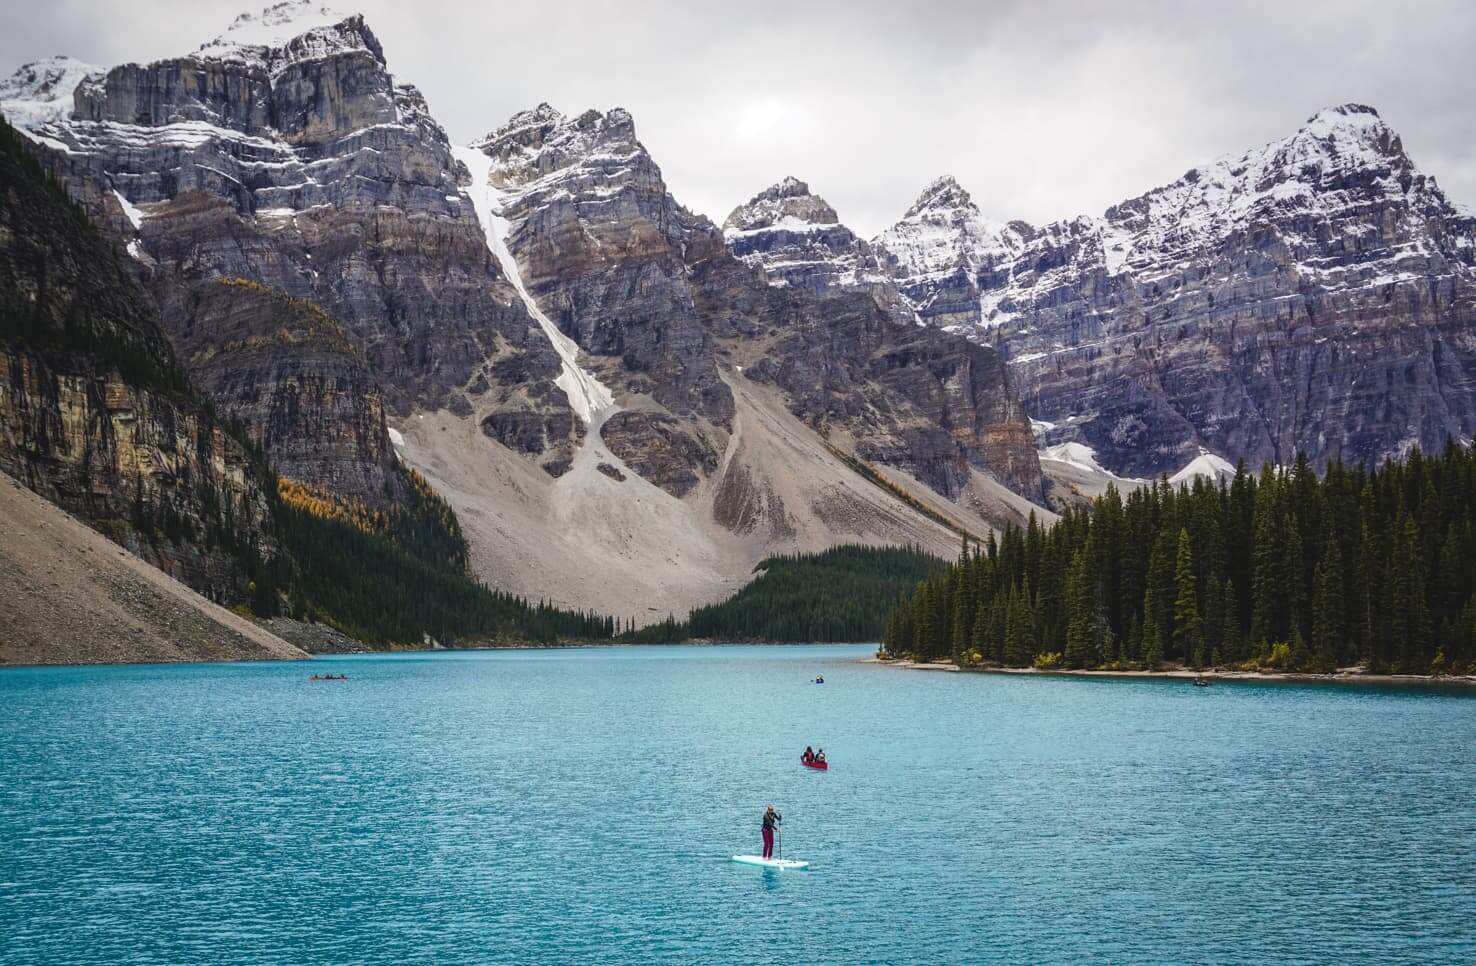 Stand up paddleboard on Moraine Lake